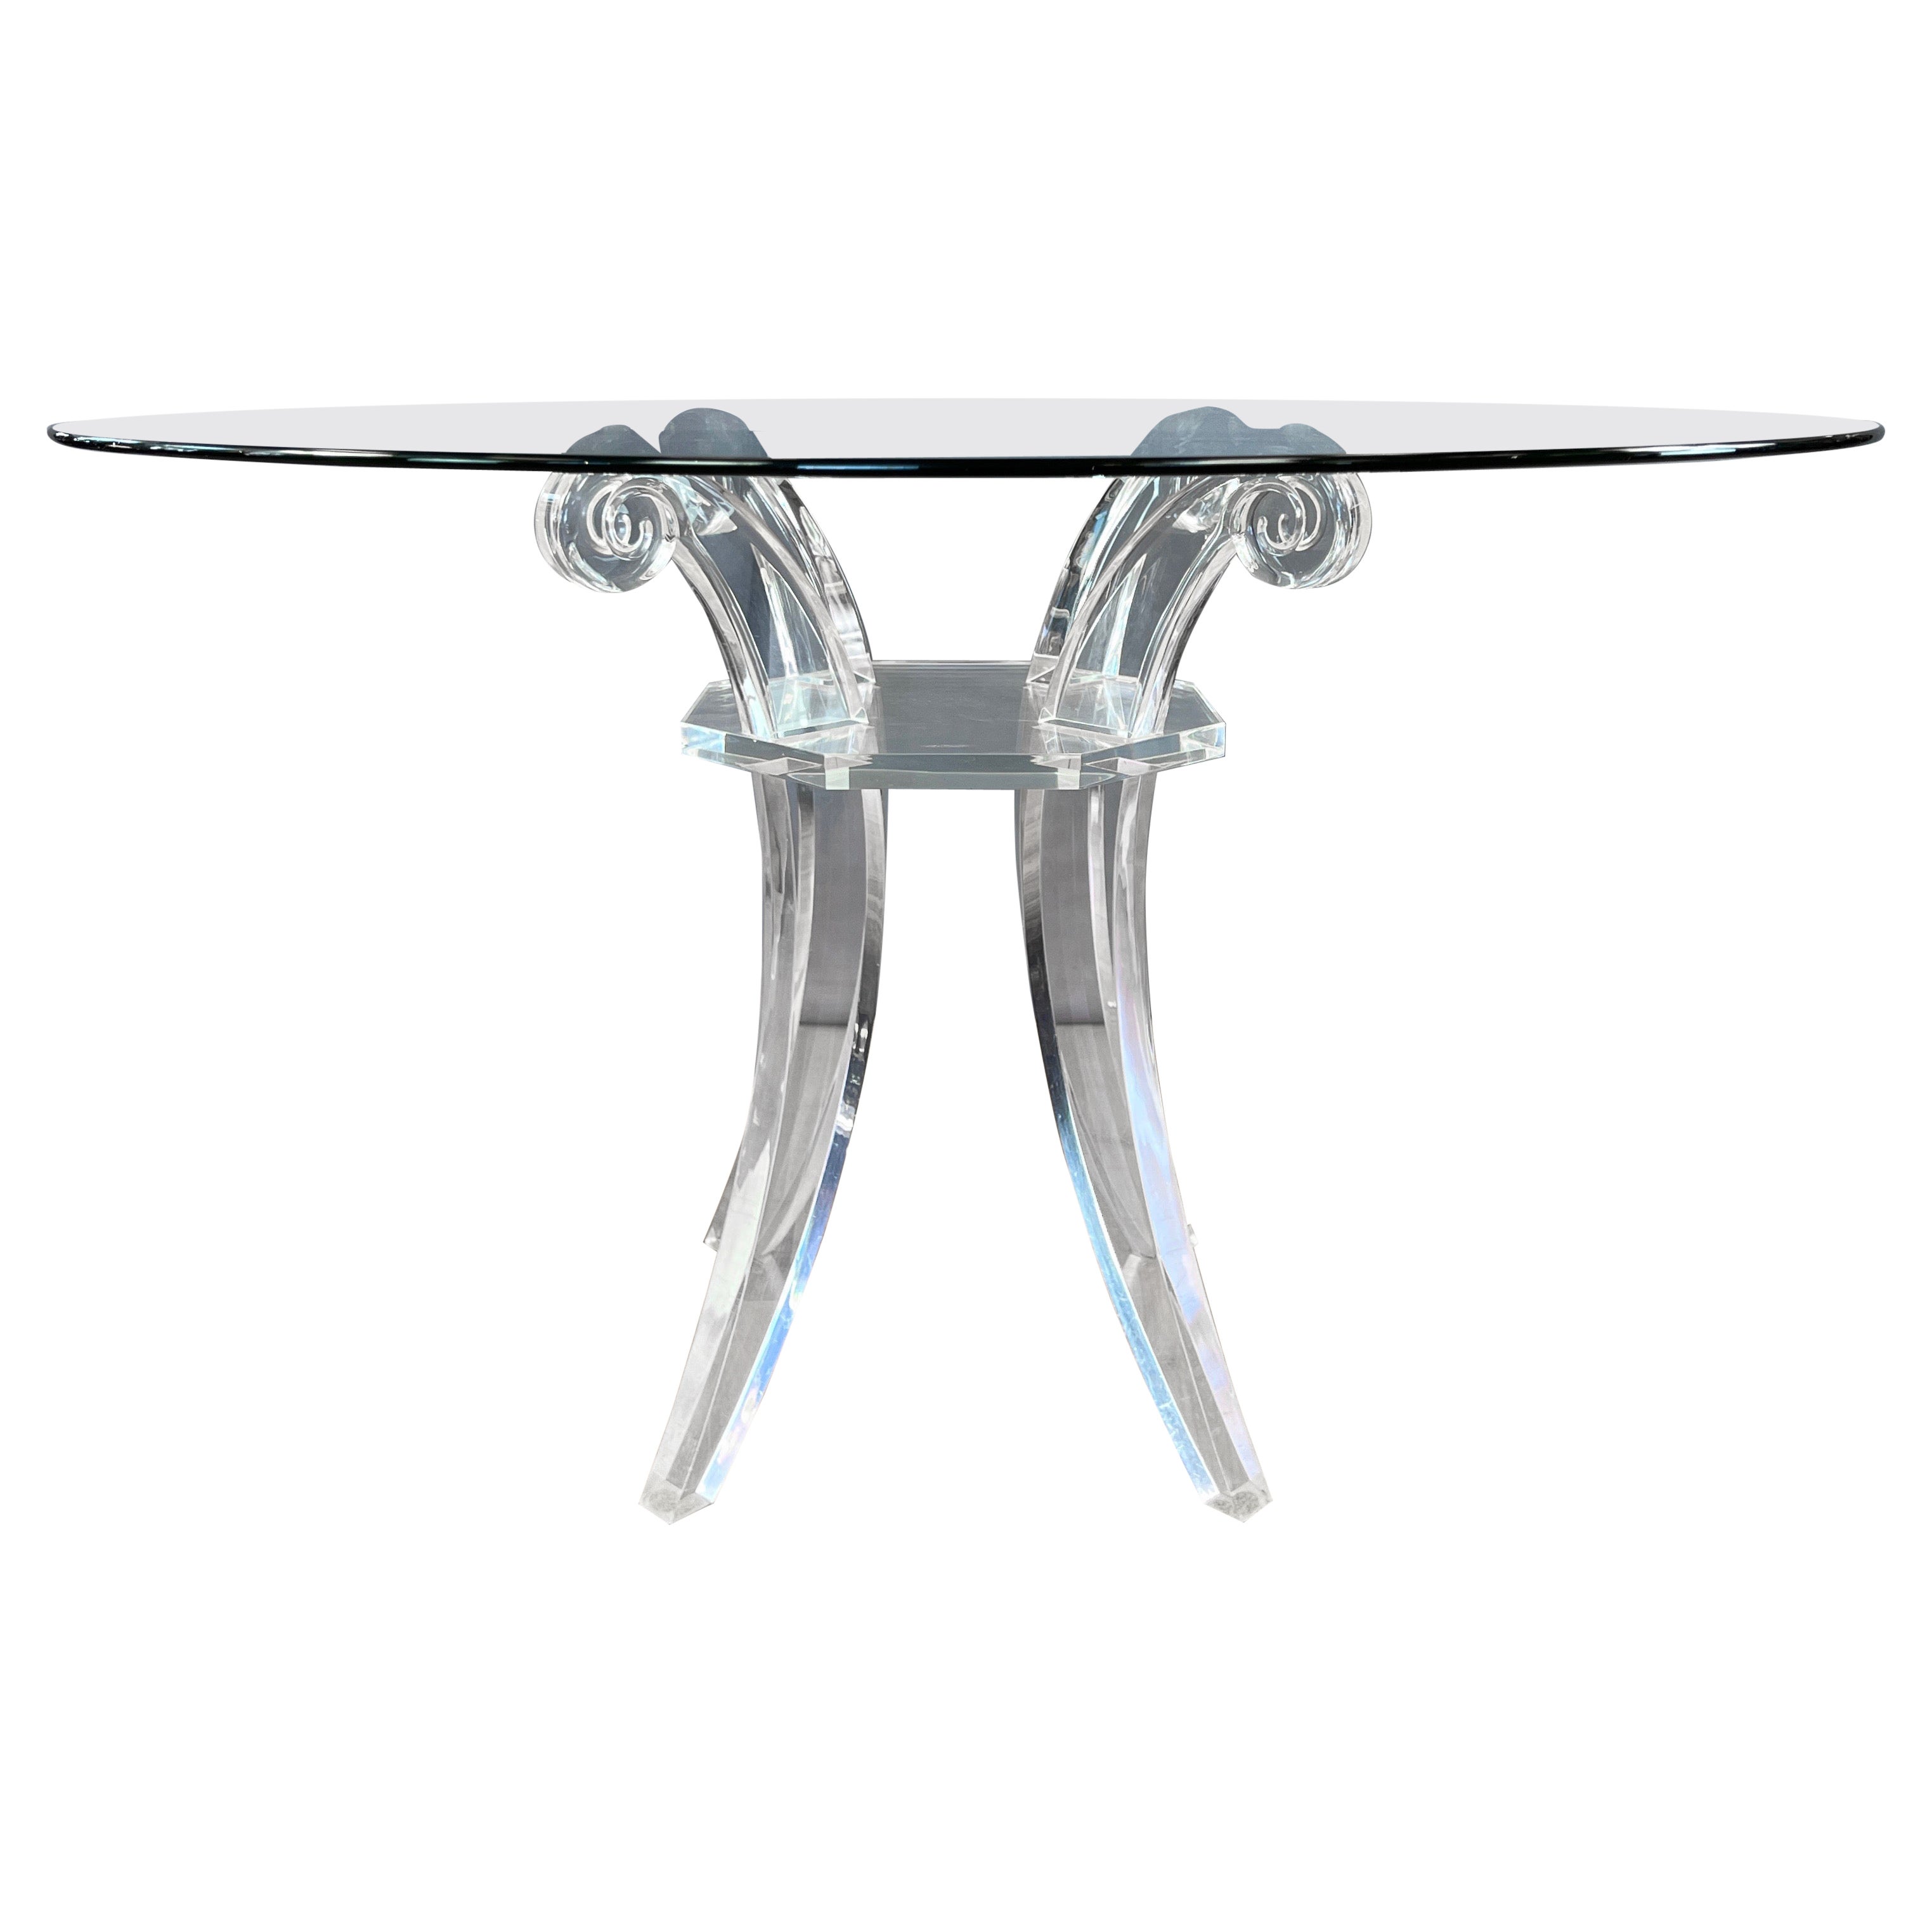 Lucite Saber Leg Scroll-Motif Dining Table with Round Glass Top, circa 1980